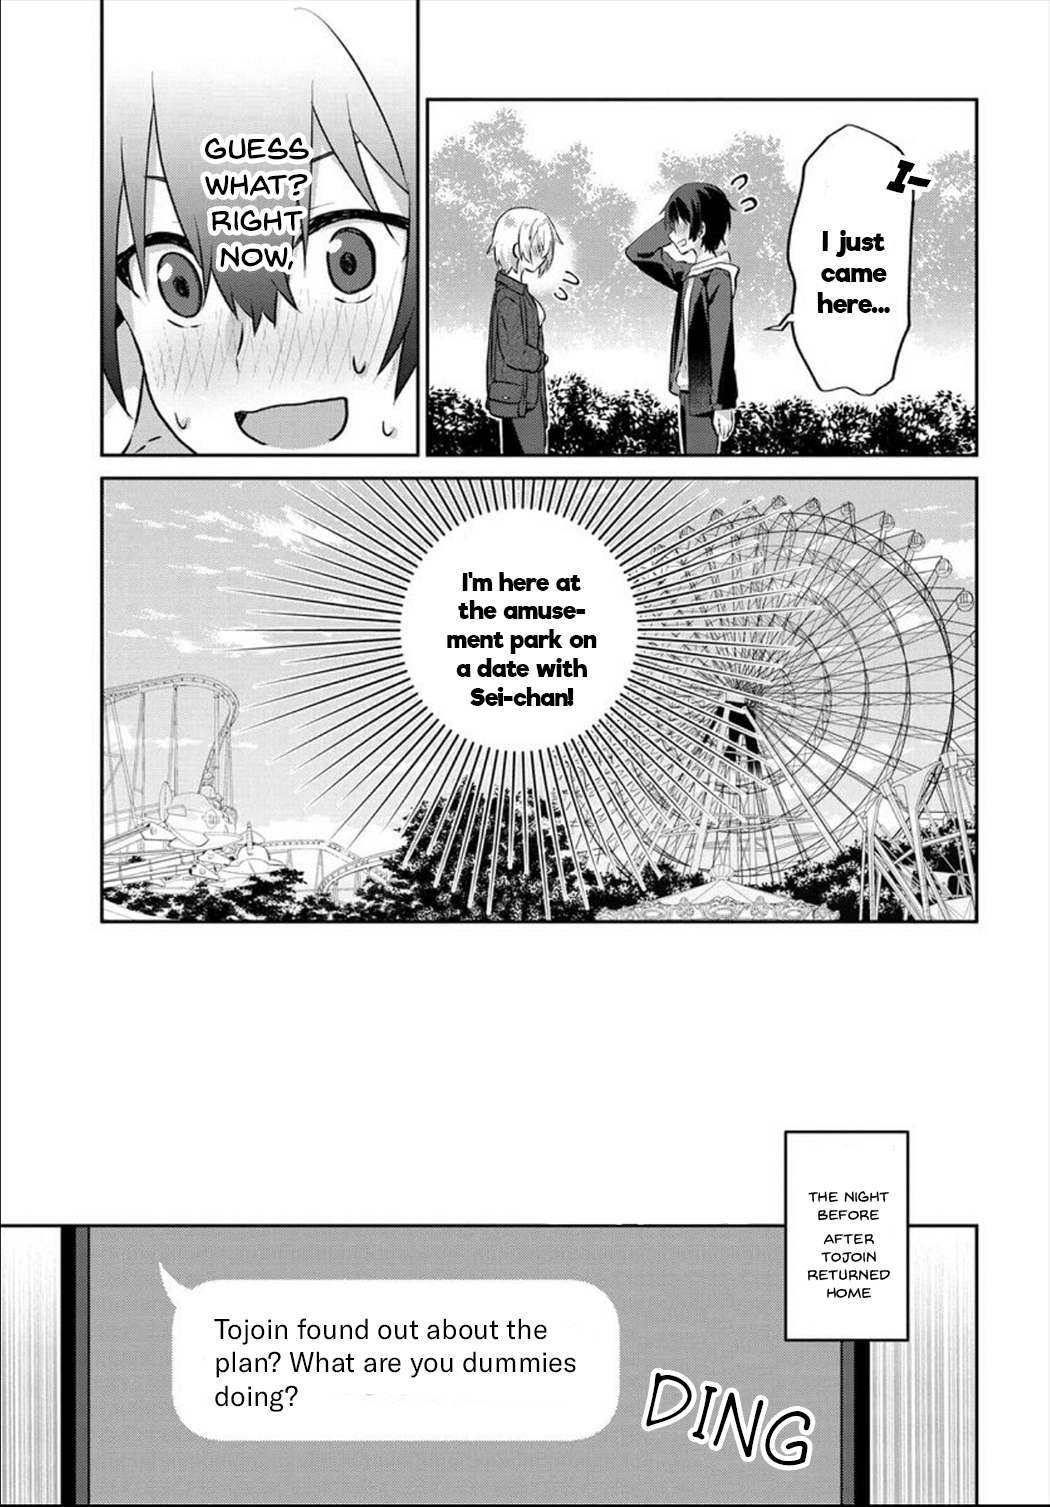 Since I’Ve Entered The World Of Romantic Comedy Manga, I’Ll Do My Best To Make The Losing Heroine Happy - chapter 6.1 - #3